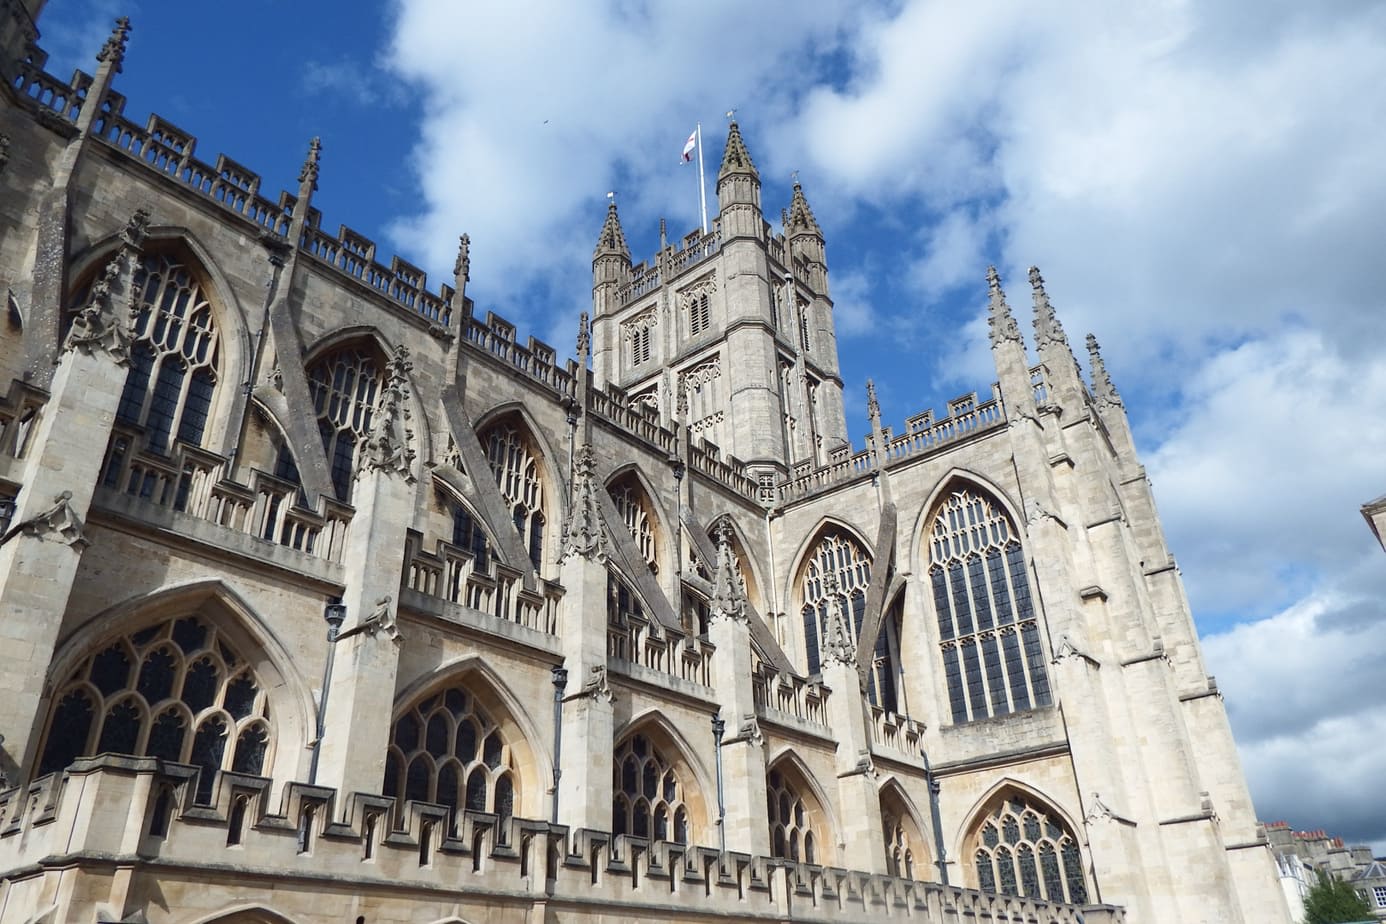 12 THINGS TO DO IN A DAY IN BATH